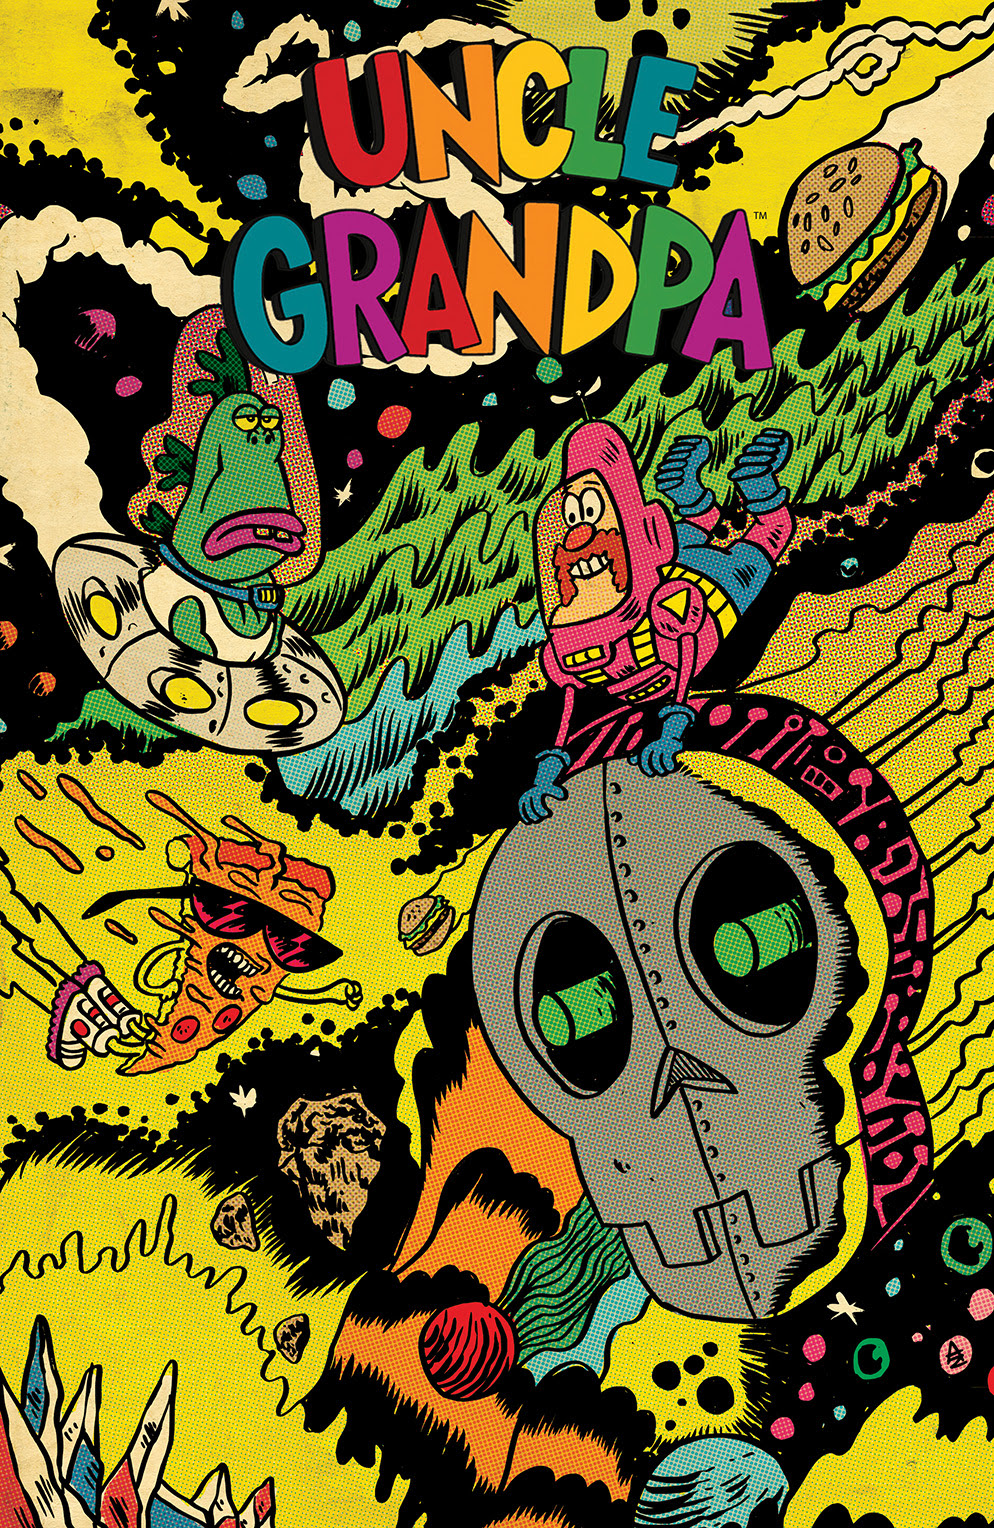 UNCLE GRANDPA #3 Cover A by Alexis Ziritt